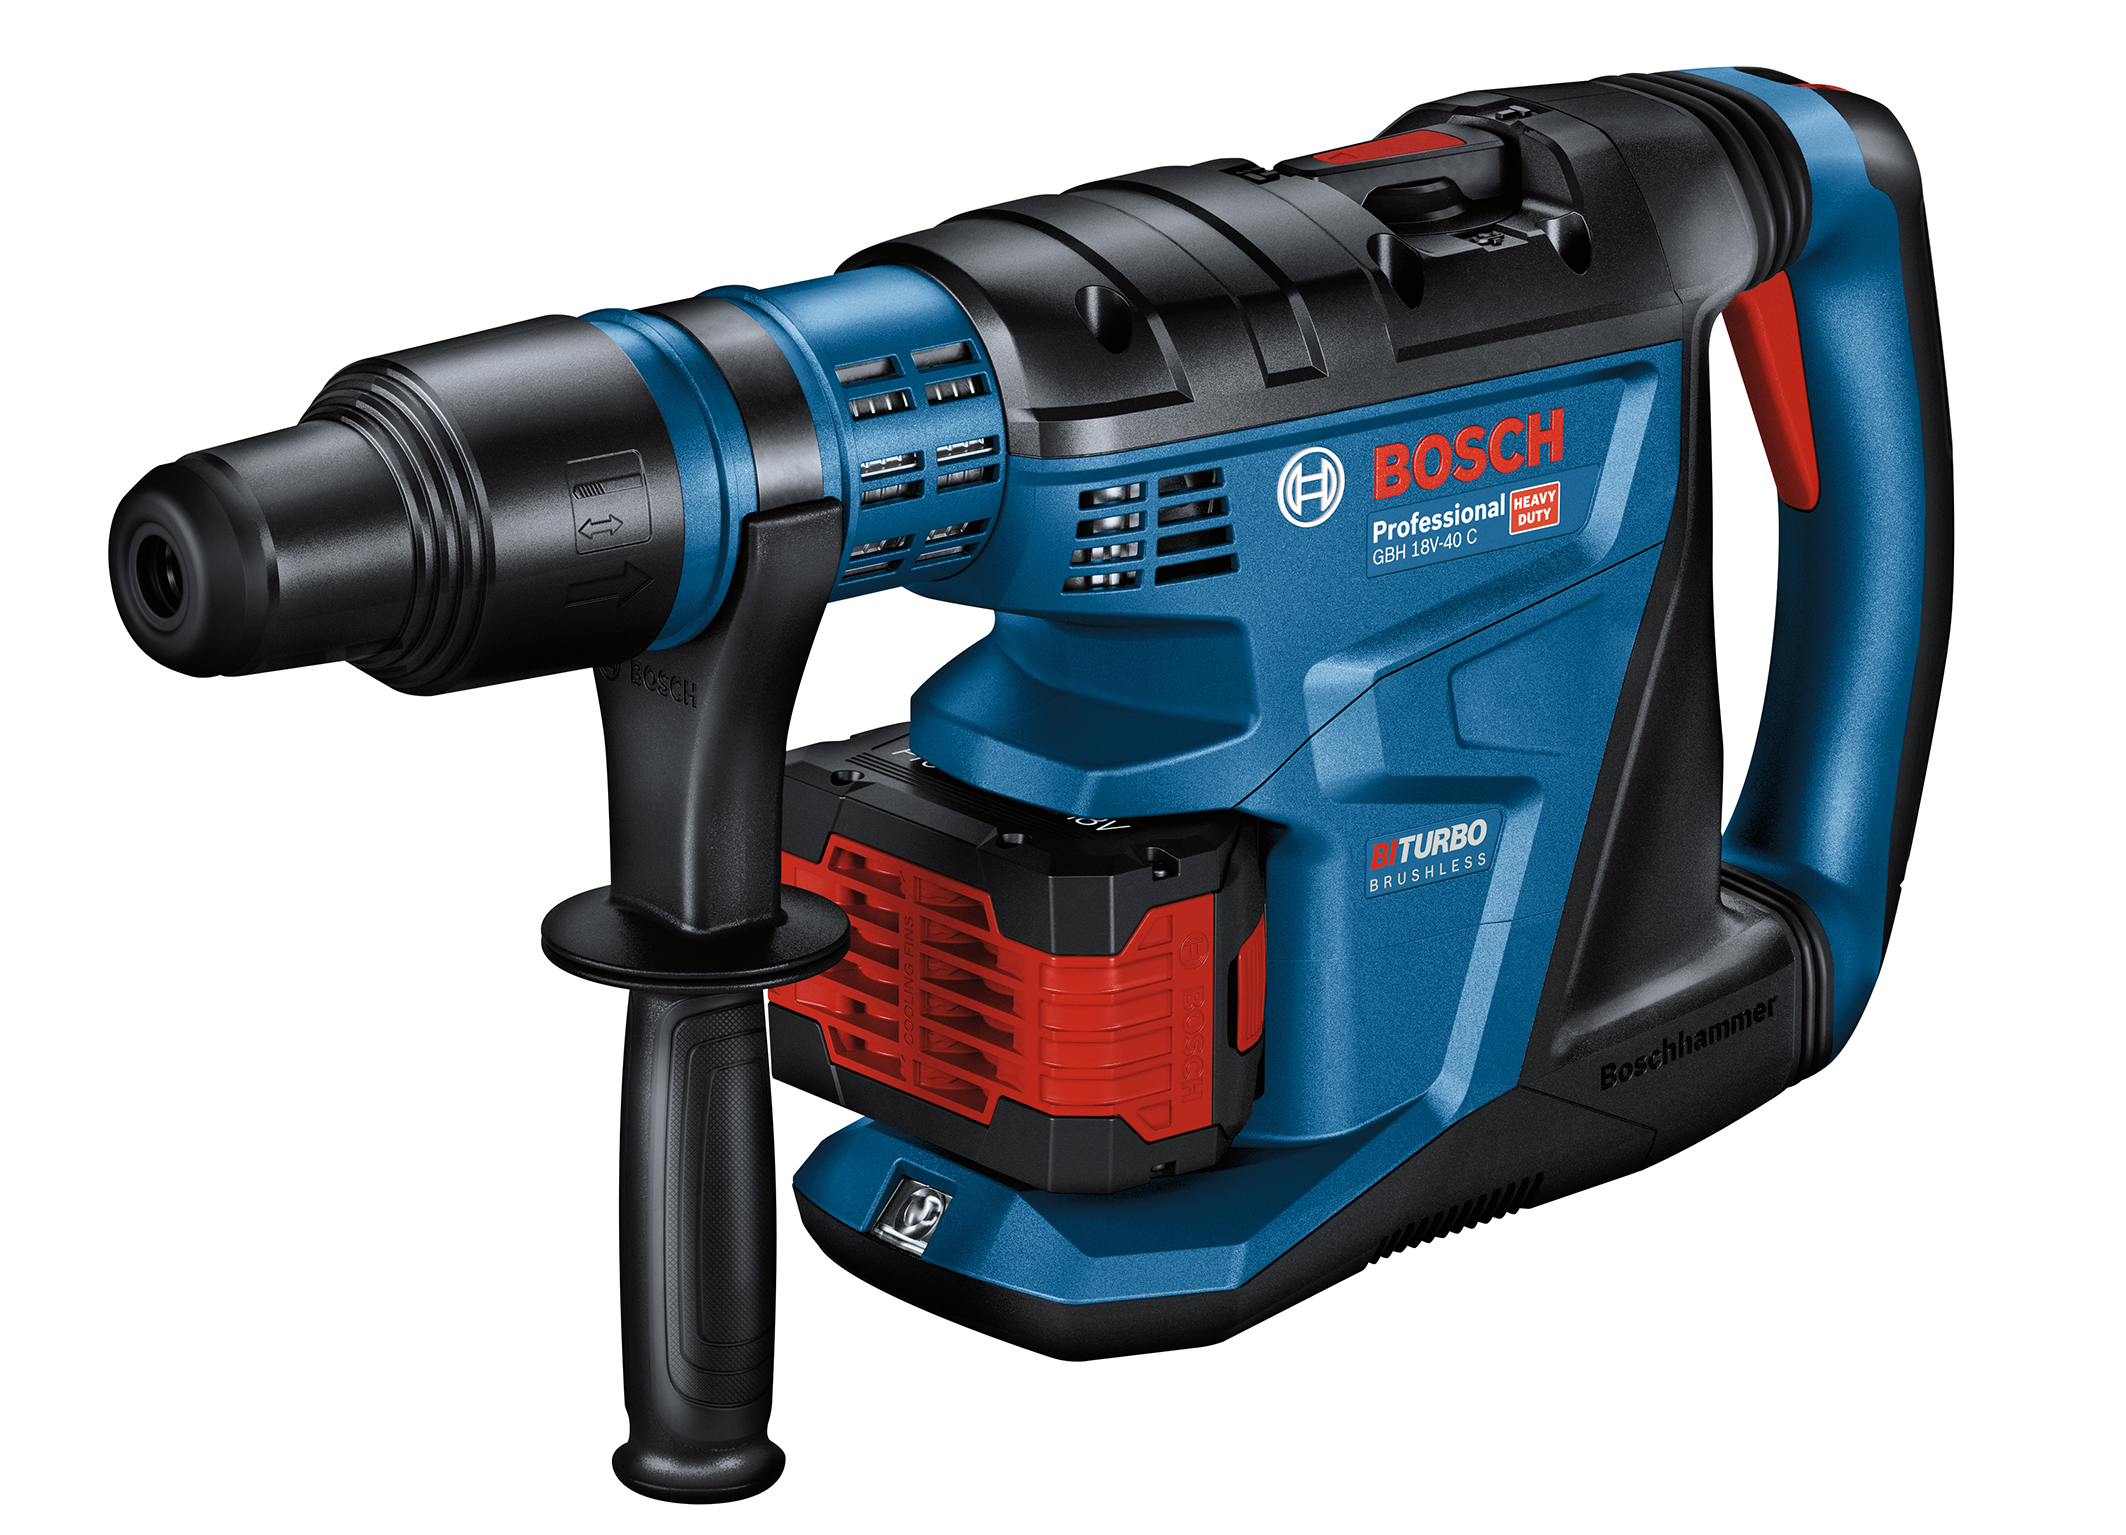 New in the Professional 18V System: Biturbo cordless rotary hammer GBH 18V-40 C Professional from Bosch